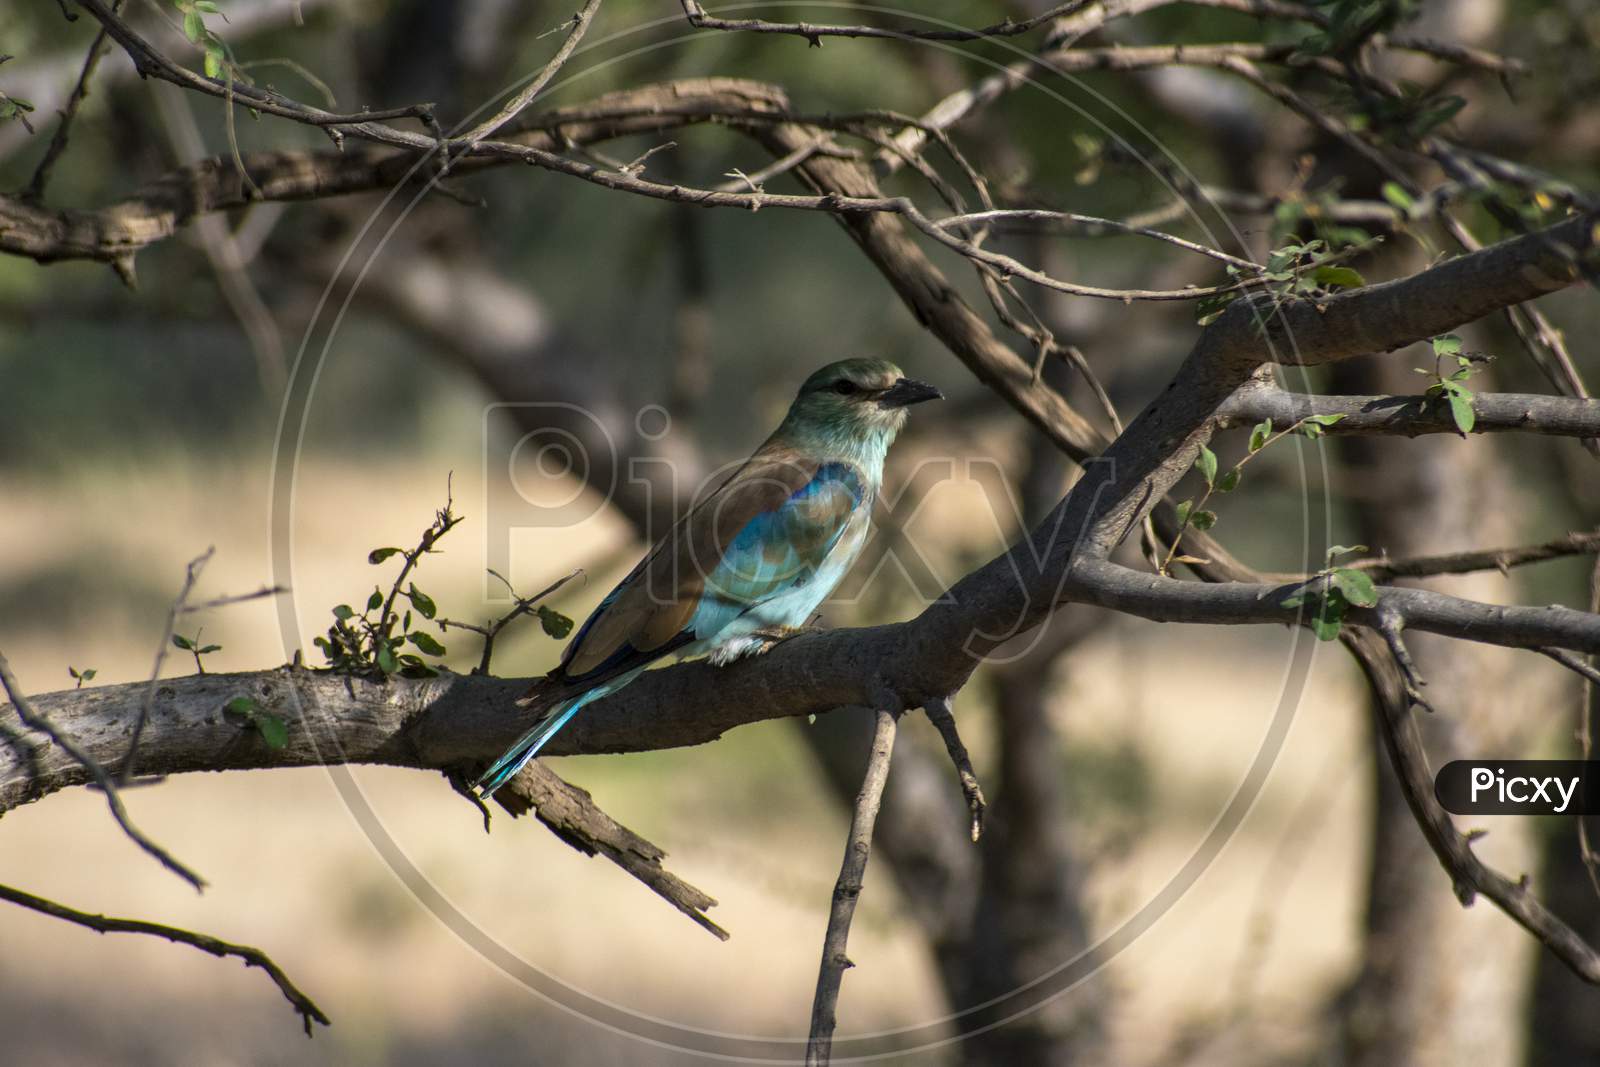 Indian Roller Hiding In A Bush At Ranthambore National Park